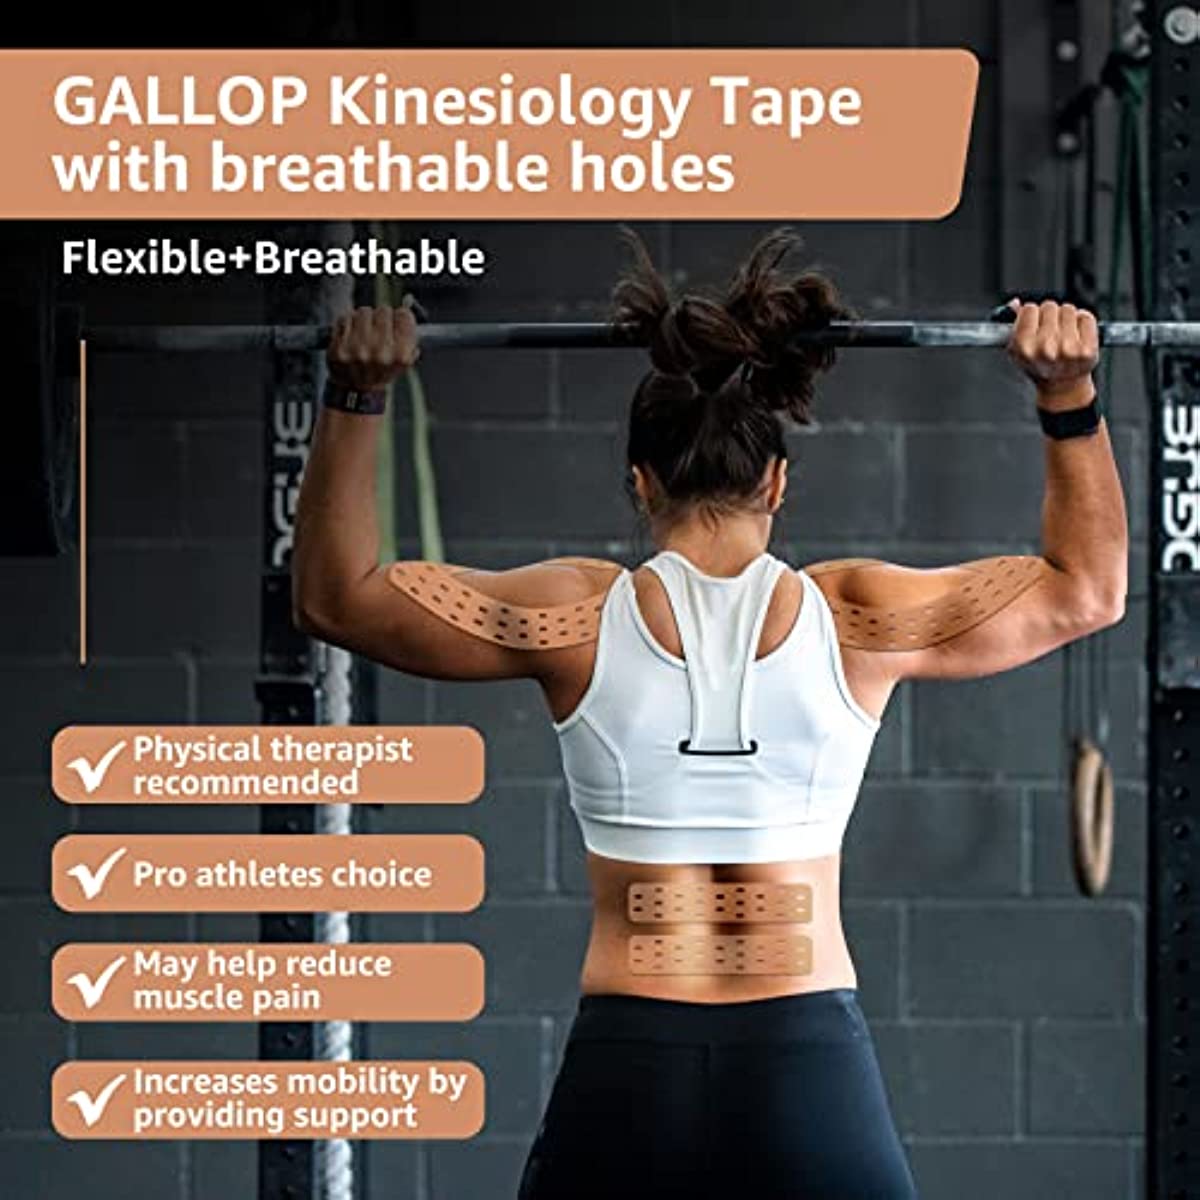 GALLOP Kinesiology Tape with Breathable Holes, Water Resistant, Sports Recovery & Support Tape for Joint,Uncut 2 inch x 16.4 feet Roll